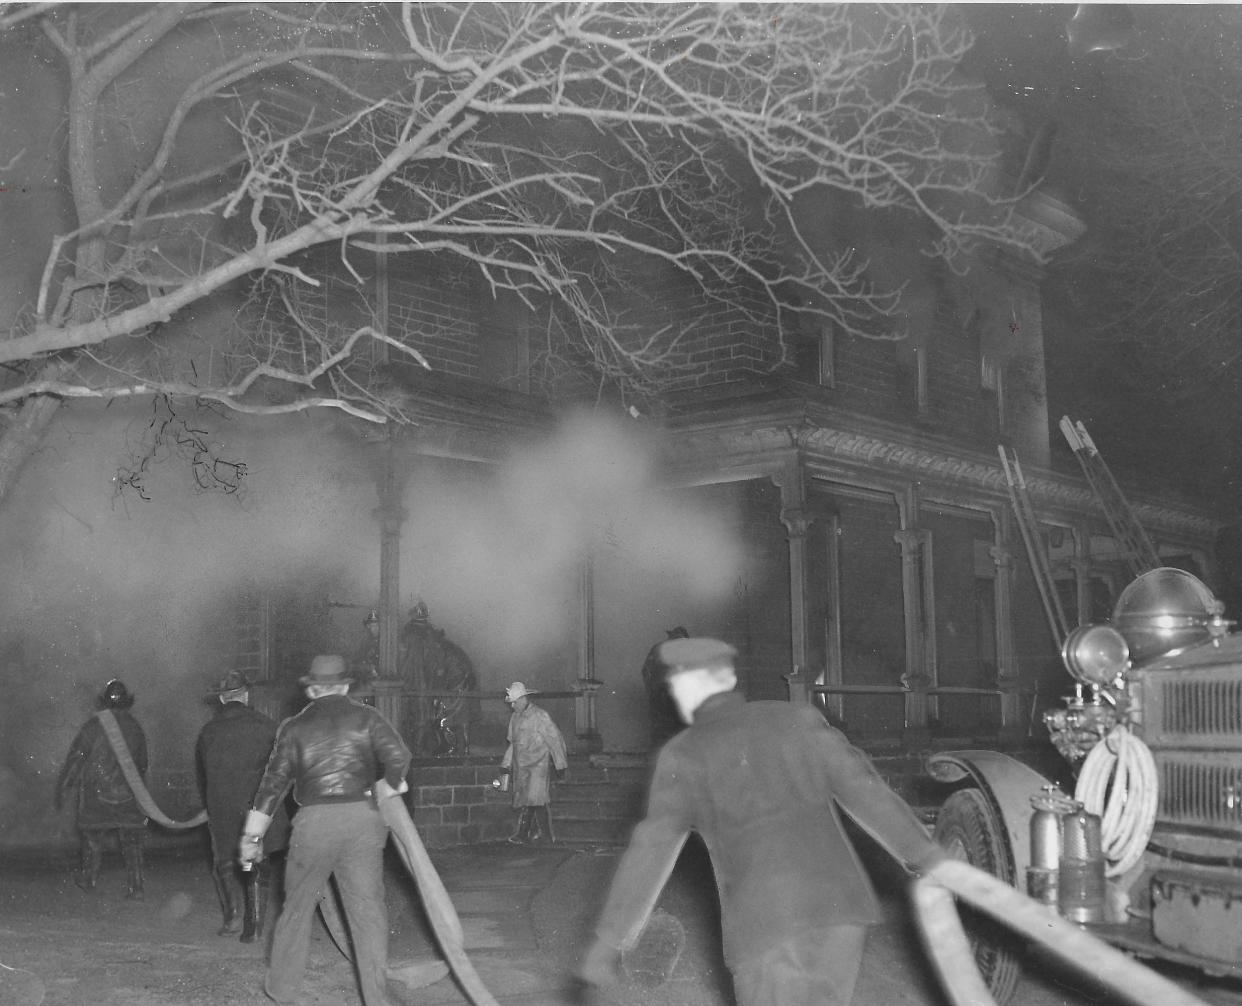 Firefighters battle a blaze in the early hours of Jan. 3, 1942, at the Akron Art Institute at 135 Fir Hill.